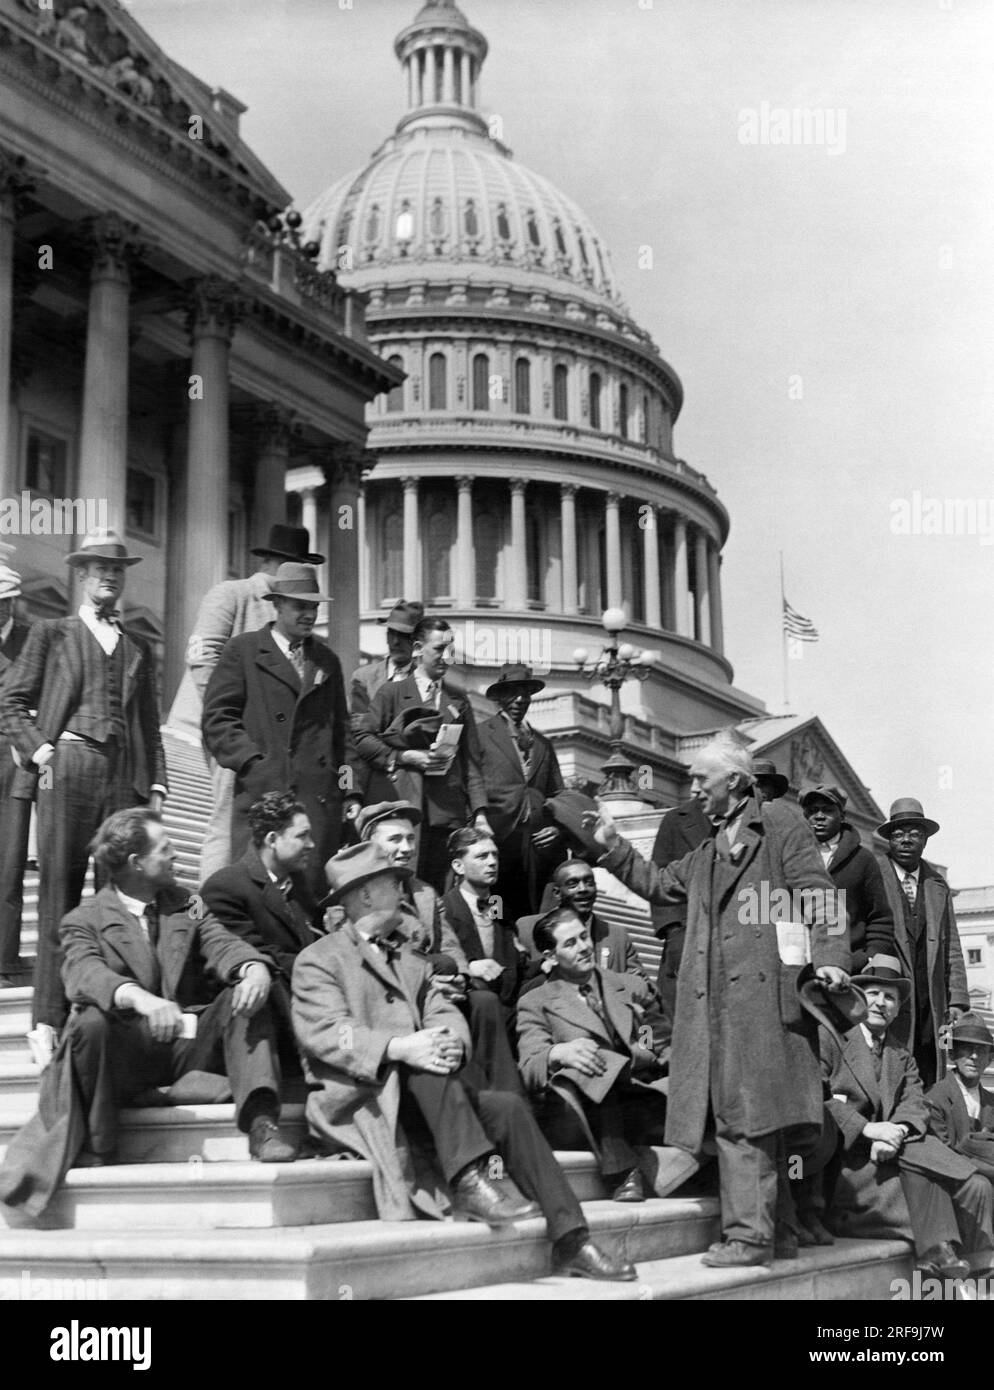 Washington, D.C.:  March 21, 1920 Dan O'Brien, 'King of the Hoboes', addresses a gathering of his colleagues on the steps of the Capitol Building in Washington. Stock Photo